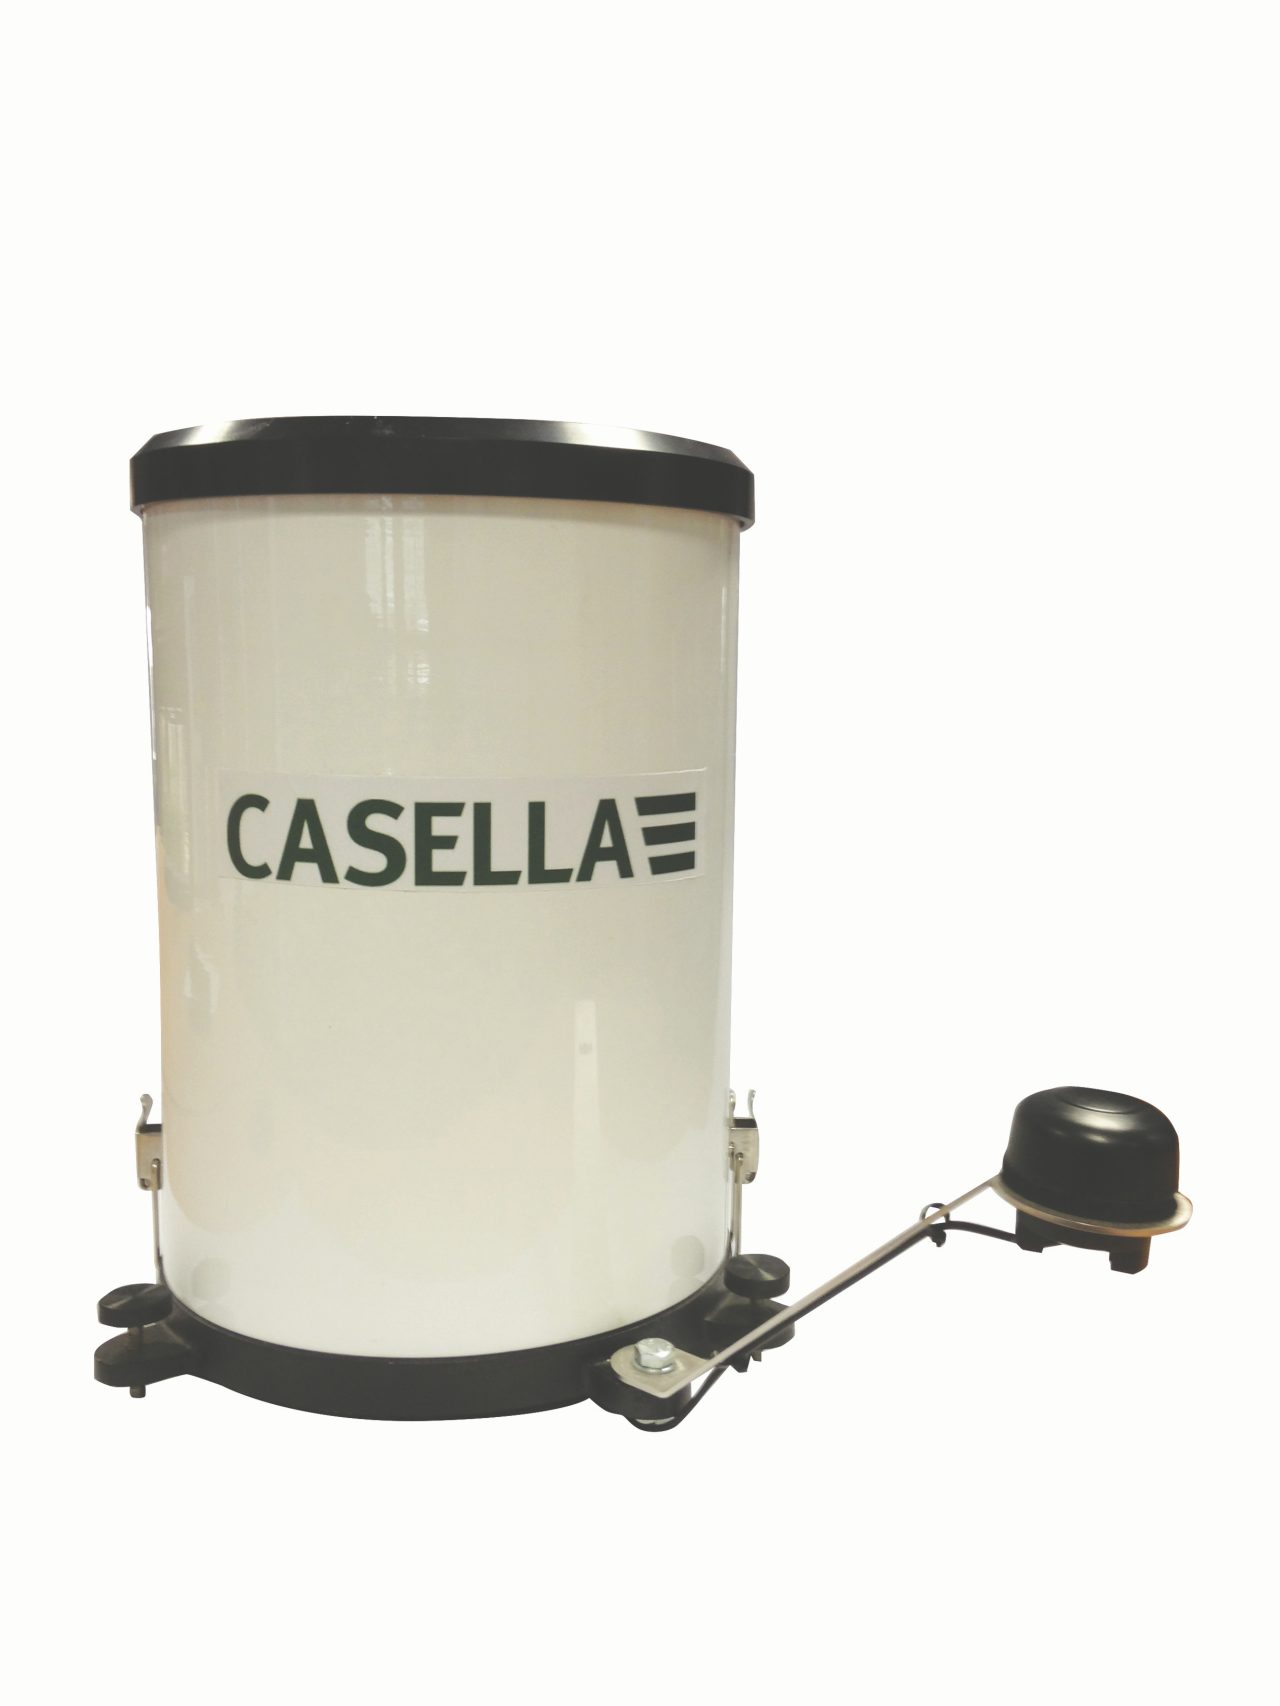 Casella TBRG is reliable and extremely robust. The body and funnel are made from aluminium alloy with an accurately machined septum ring at the top giving an aperture of 400cm2.